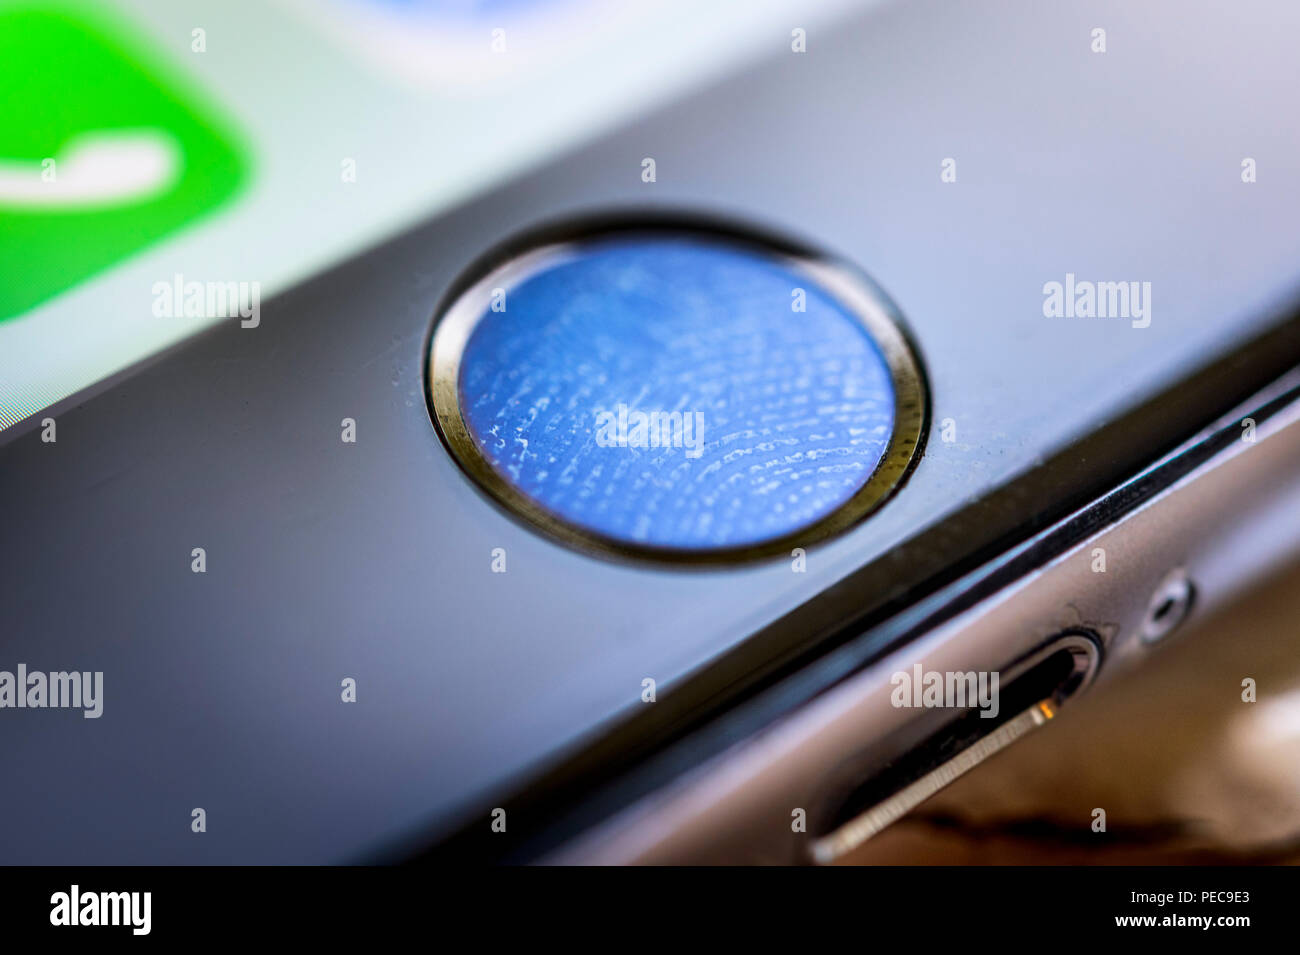 Close-up of Home button of the iPhone 6s with fingerprint on fingerprint sensor, Touch ID, fingerprint reader, iOS, smartphone Stock Photo